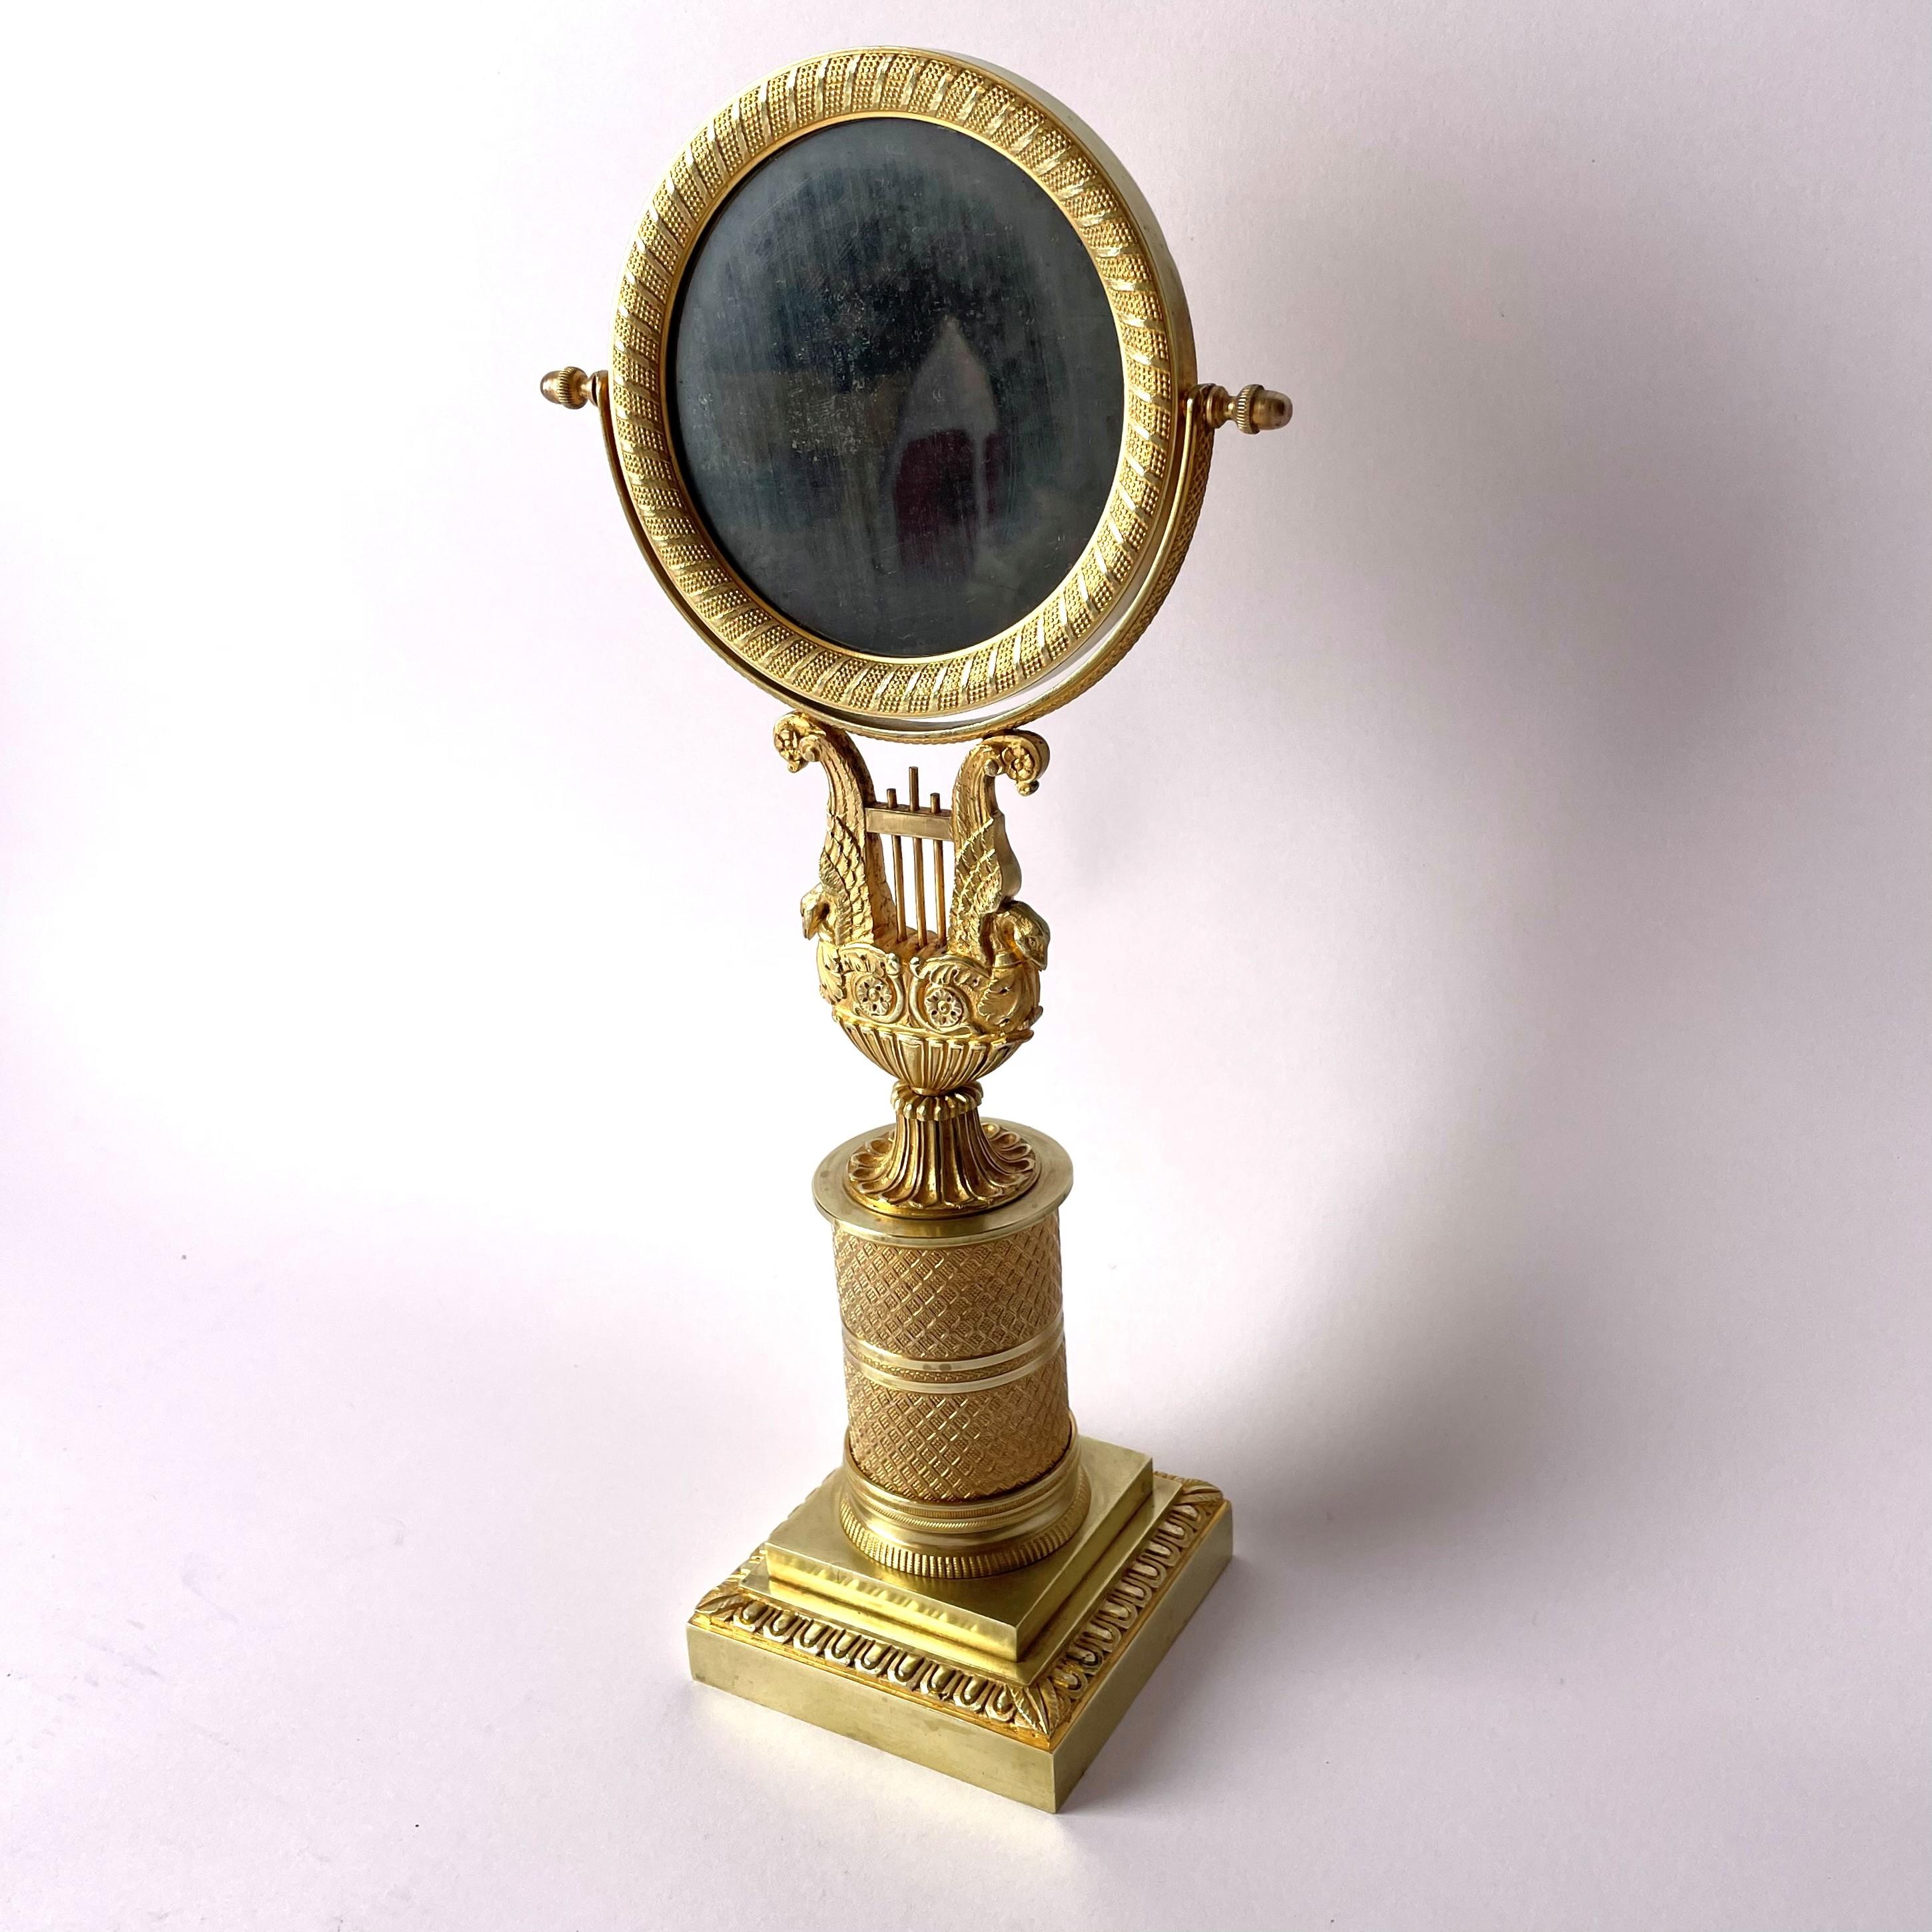 Elegant and rare empire table mirror in gilded bronze. Very good quality. Made i France around 1820, with original mirror glass with patina.

Wear consistent with age and use.